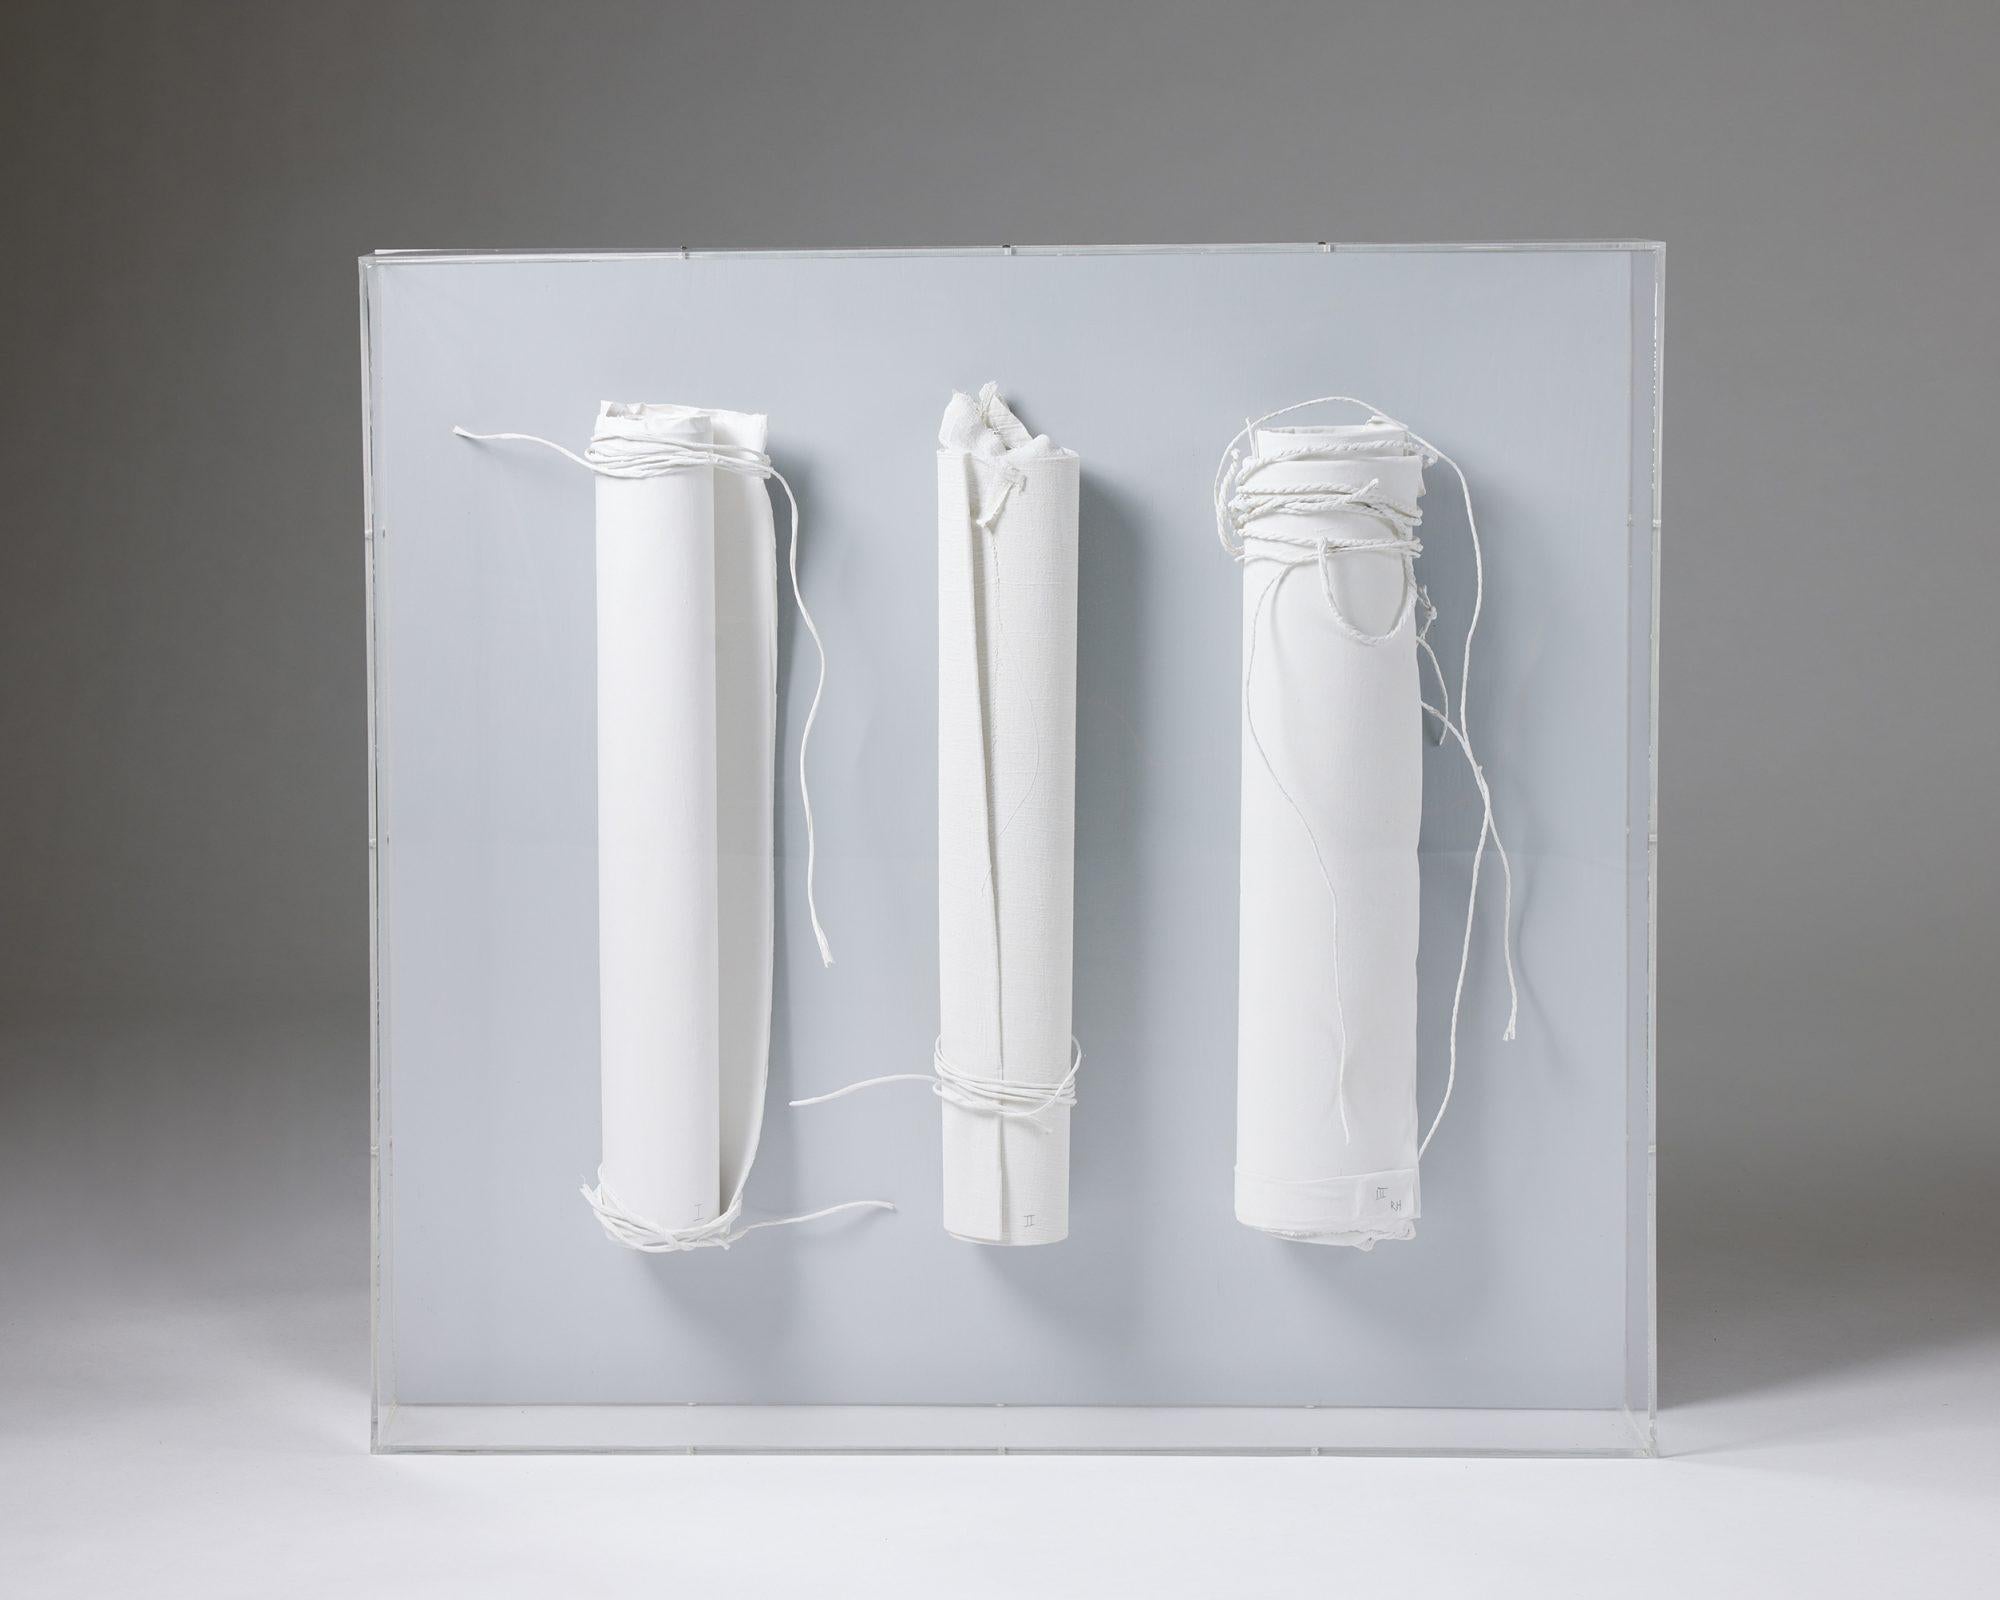 Three mounted scrolls by Rune Hagberg,
Sweden, 1970s.

Paper scrolls mounted on a board in a plexiglass box.

Unique.

Signed.

H: 76 cm
W: 81 cm
D: 12 cm

Rune Fredrik Hagberg was a renowned Swedish artist that took much of his